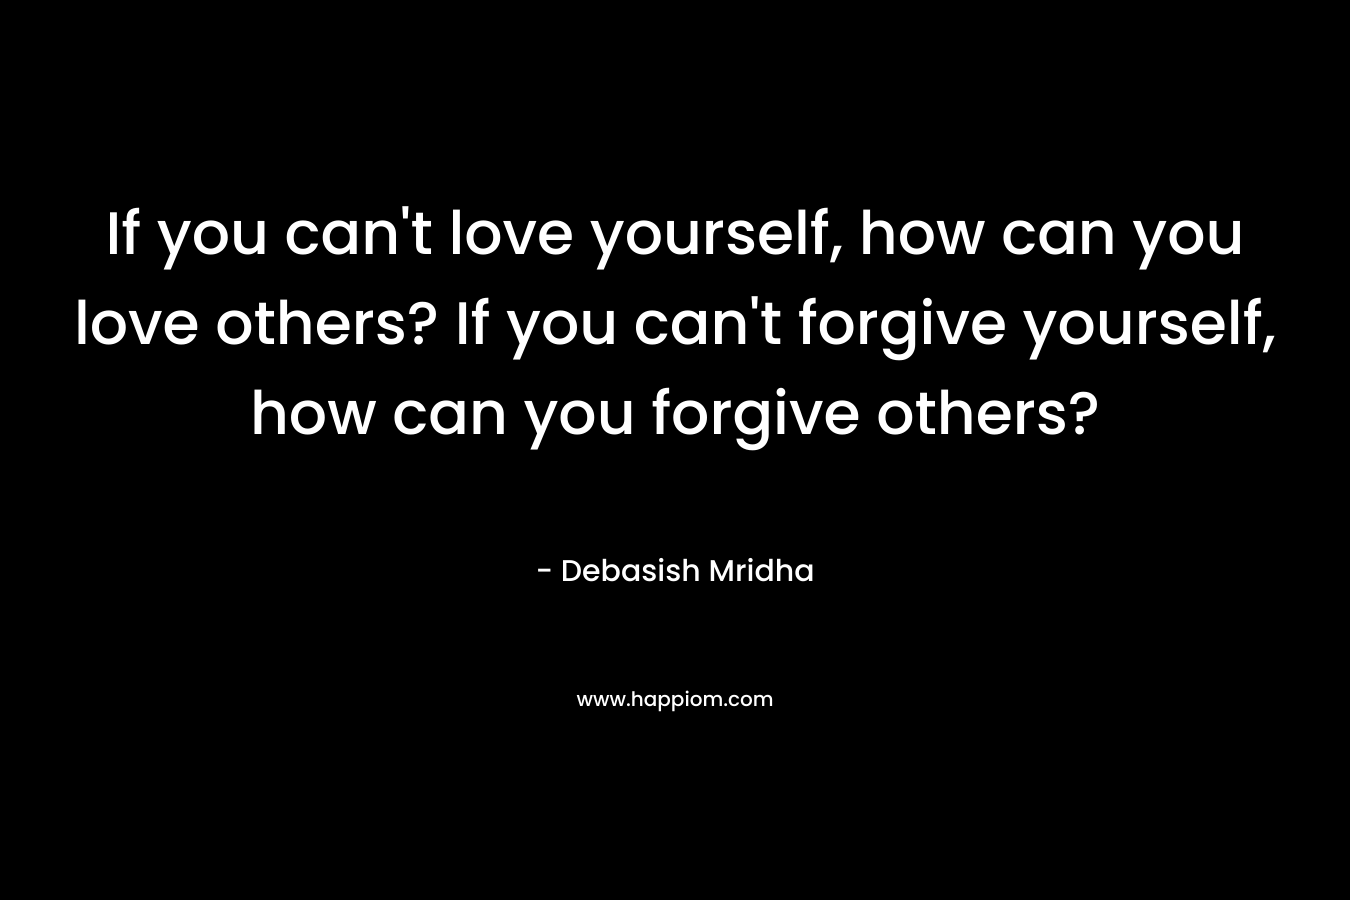 If you can't love yourself, how can you love others? If you can't forgive yourself, how can you forgive others?